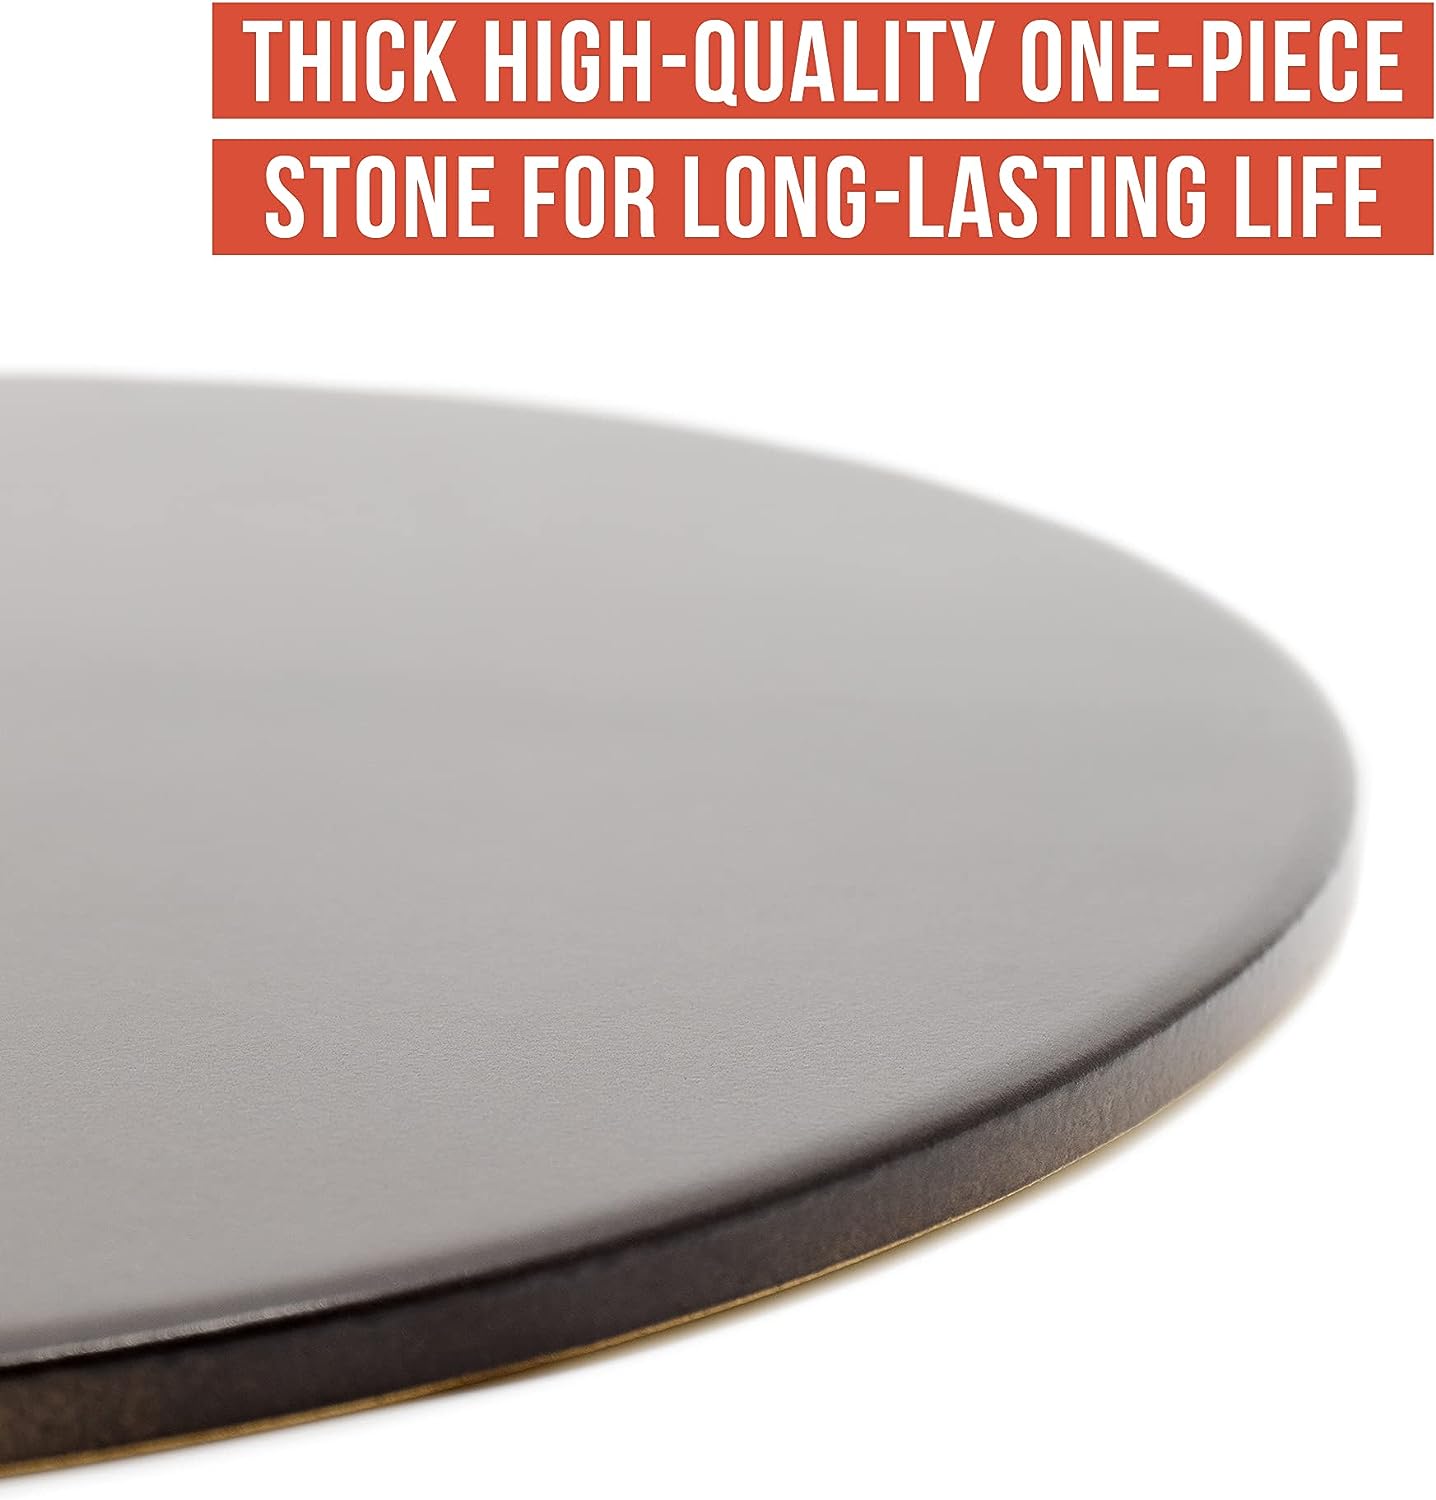 15" Round Pizza Stone, Glazed Natural Stone for Baking Ovens and Grills